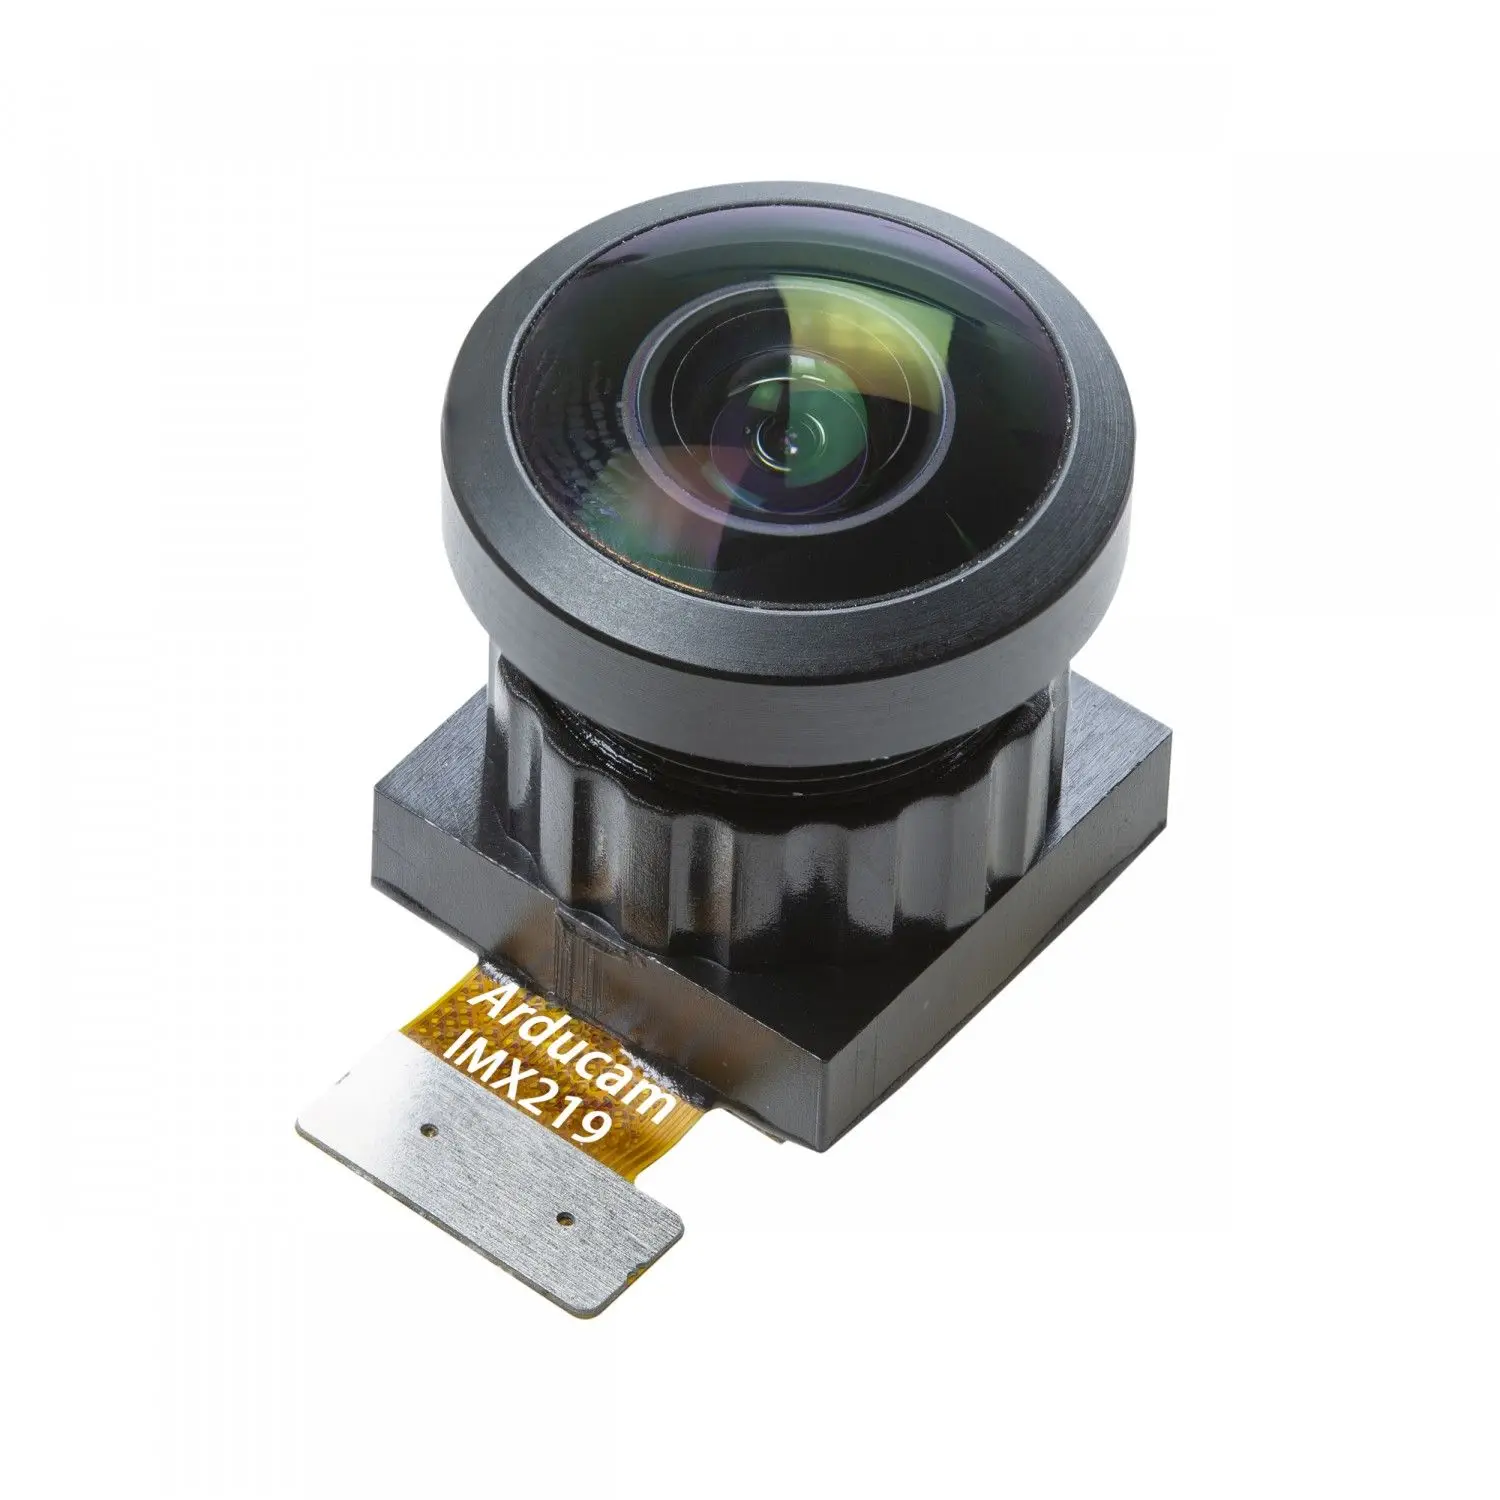 

Arducam IMX219 Wide Angle NoIR IR sensitive Camera Module, drop-in replacement for Raspberry Pi V2 Camera and Jetson Nano Camera